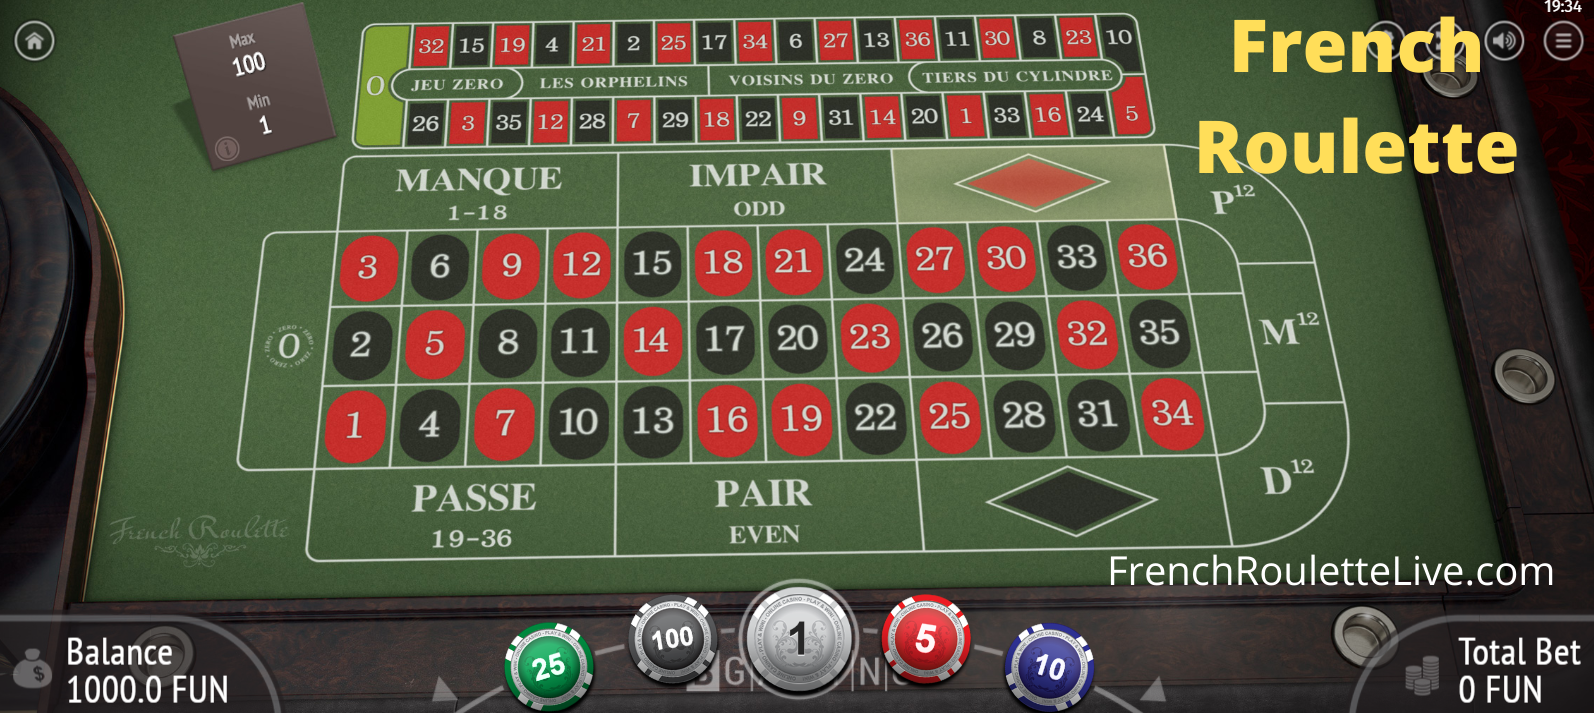 Roulette Table Layouts - Main Table and Racetrack